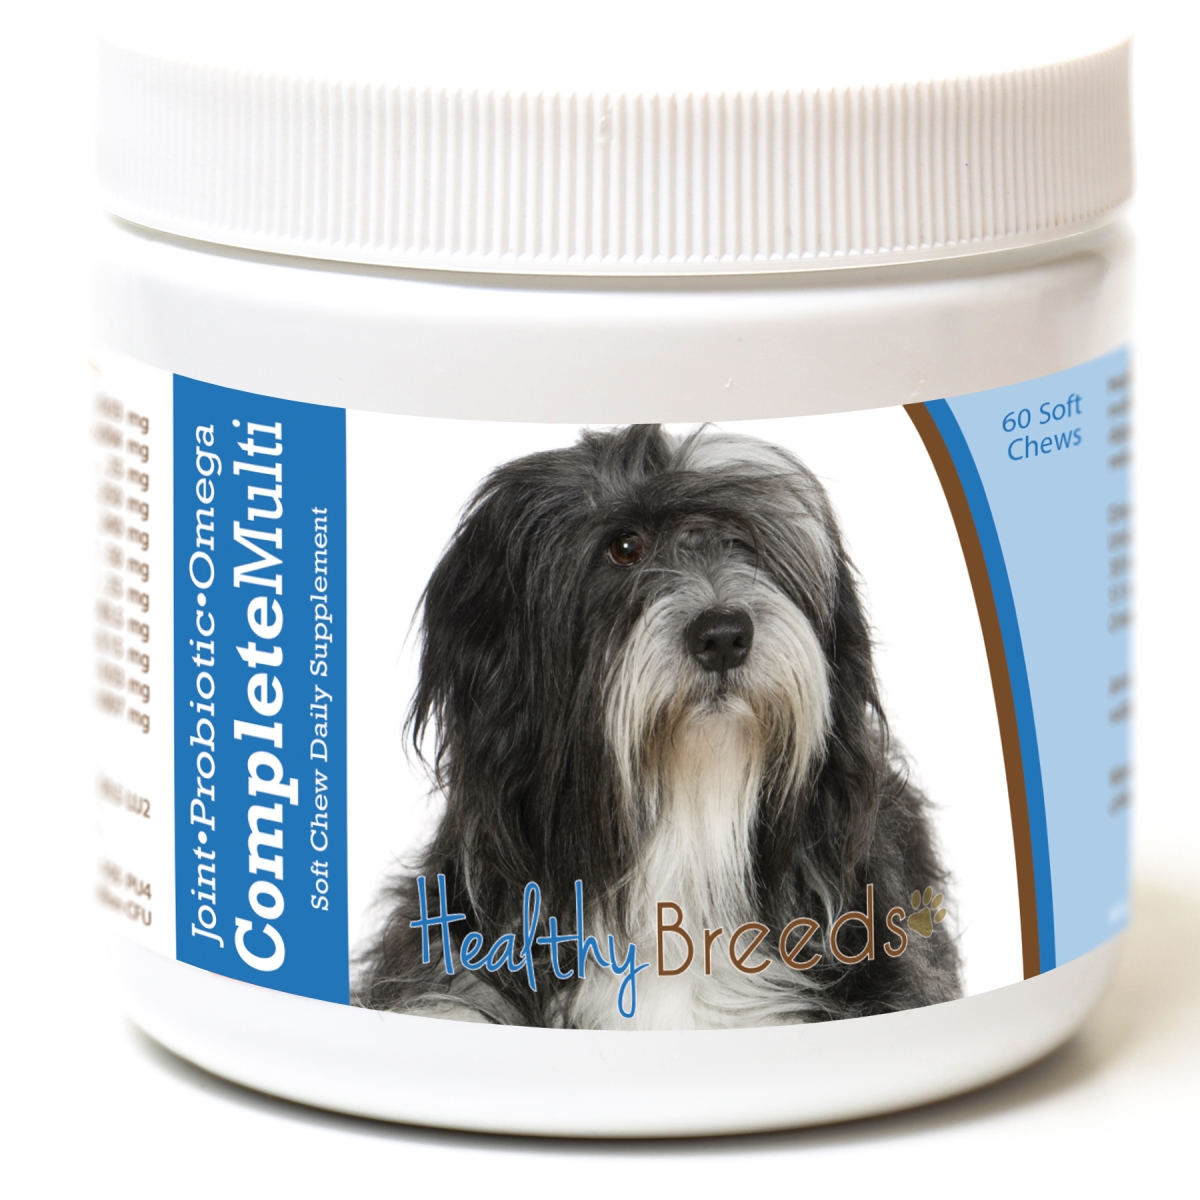 Picture of Healthy Breeds 192959008418 Lhasa Apso All in One Multivitamin Soft Chew - 60 Count